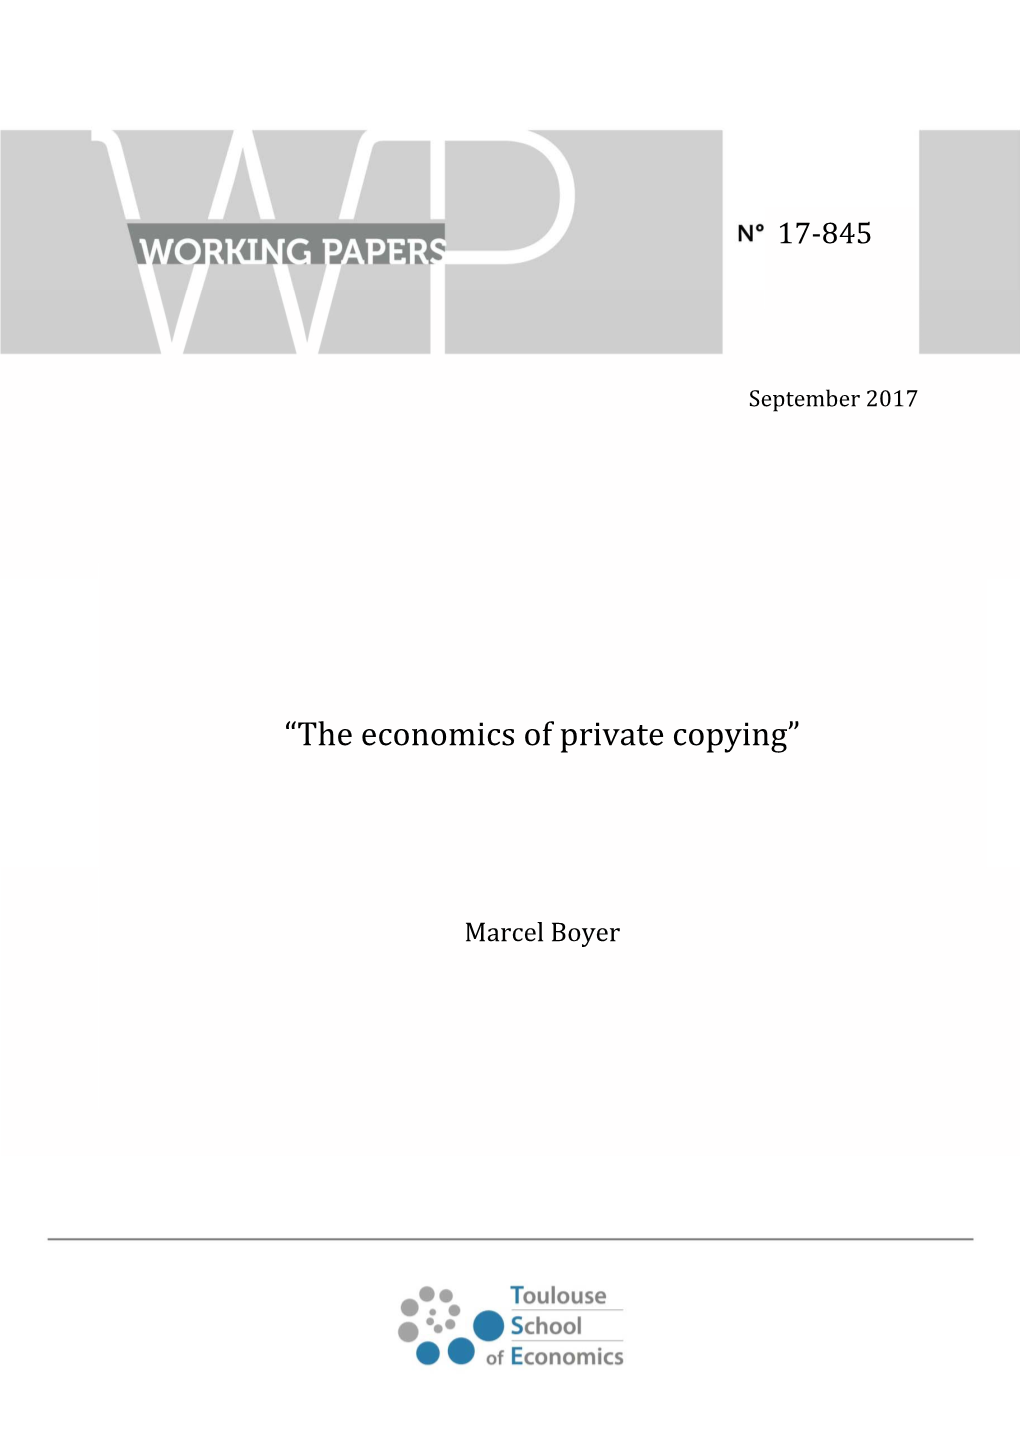 “The Economics of Private Copying”